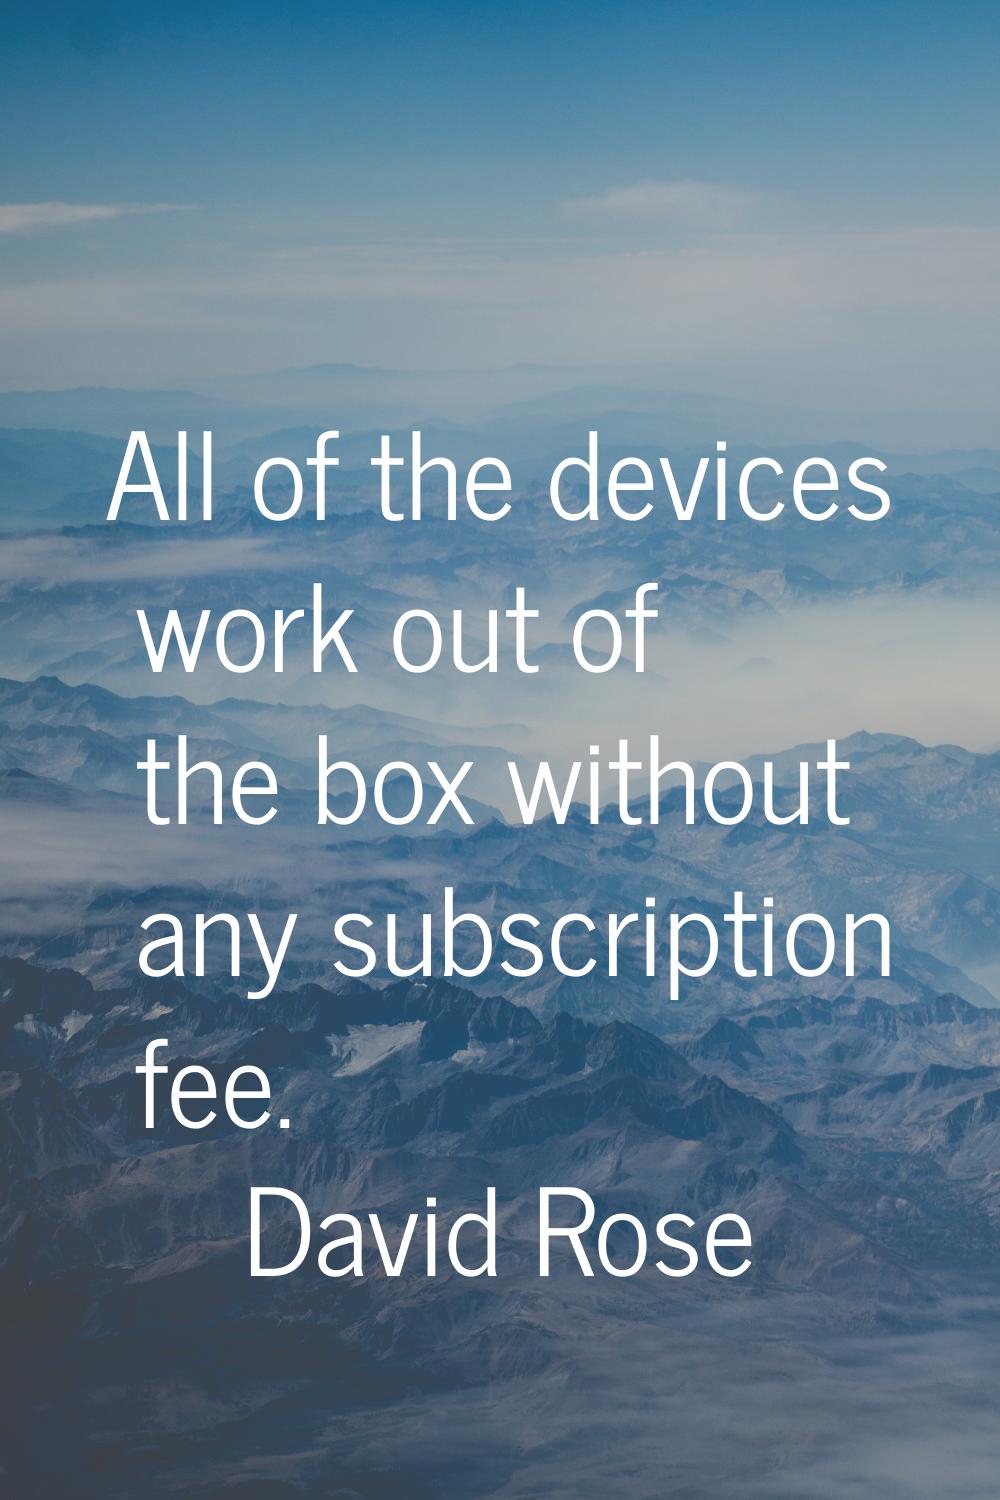 All of the devices work out of the box without any subscription fee.